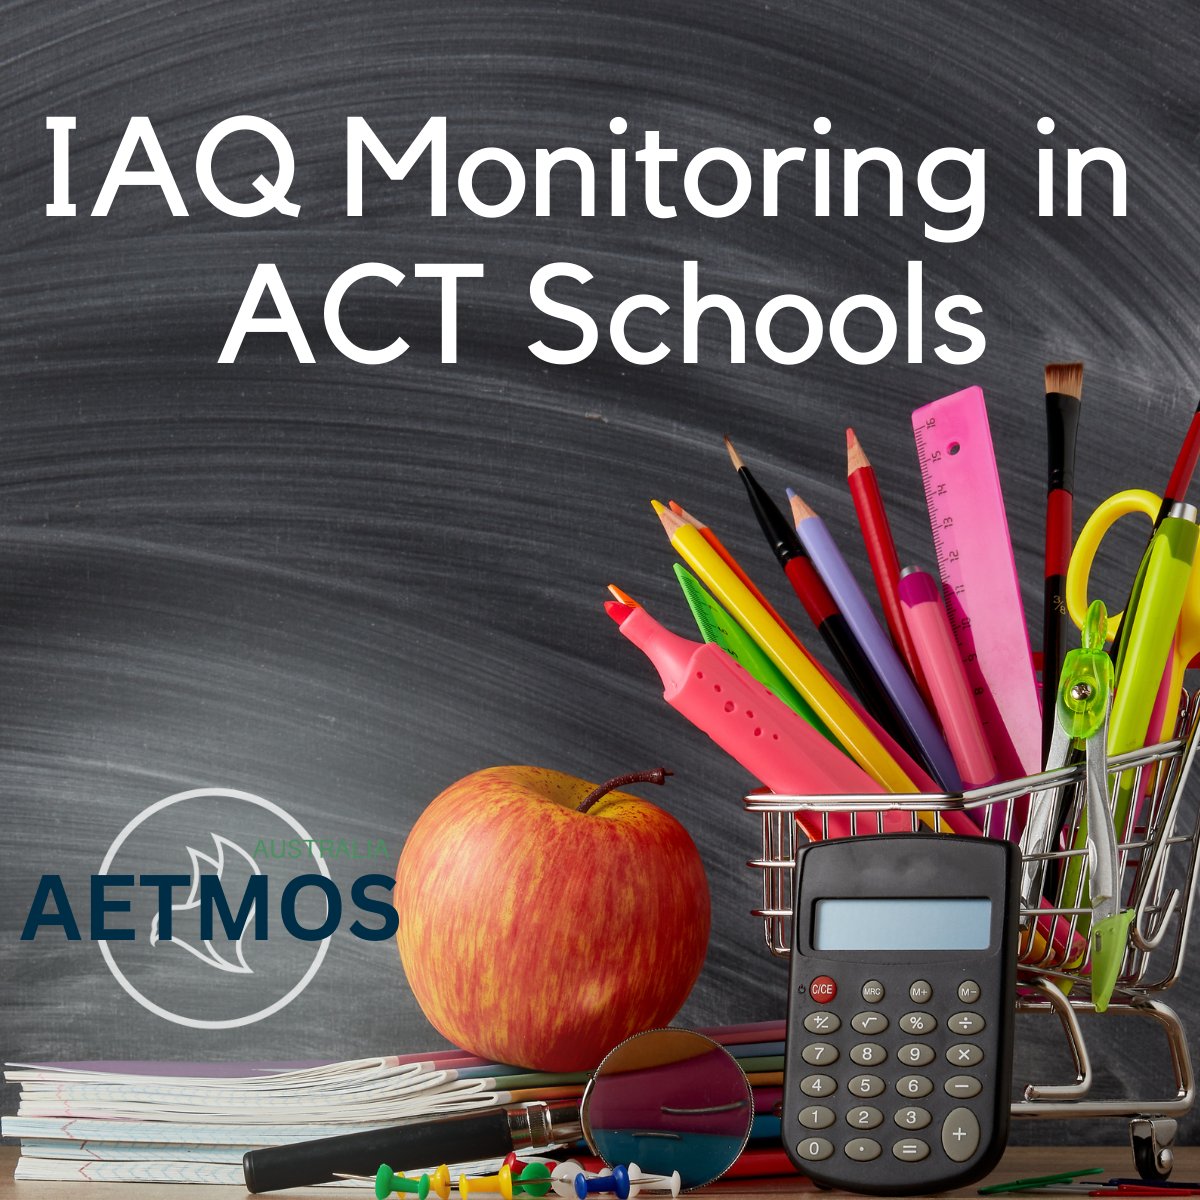 Exciting news! AETMOS Australia has partnered with schools in the ACT to monitor indoor air quality. Healthier environments, better focus, improved learning. Let's breathe clean air together! #AETMOSAustralia #HealthySchools #AirQualityMatters